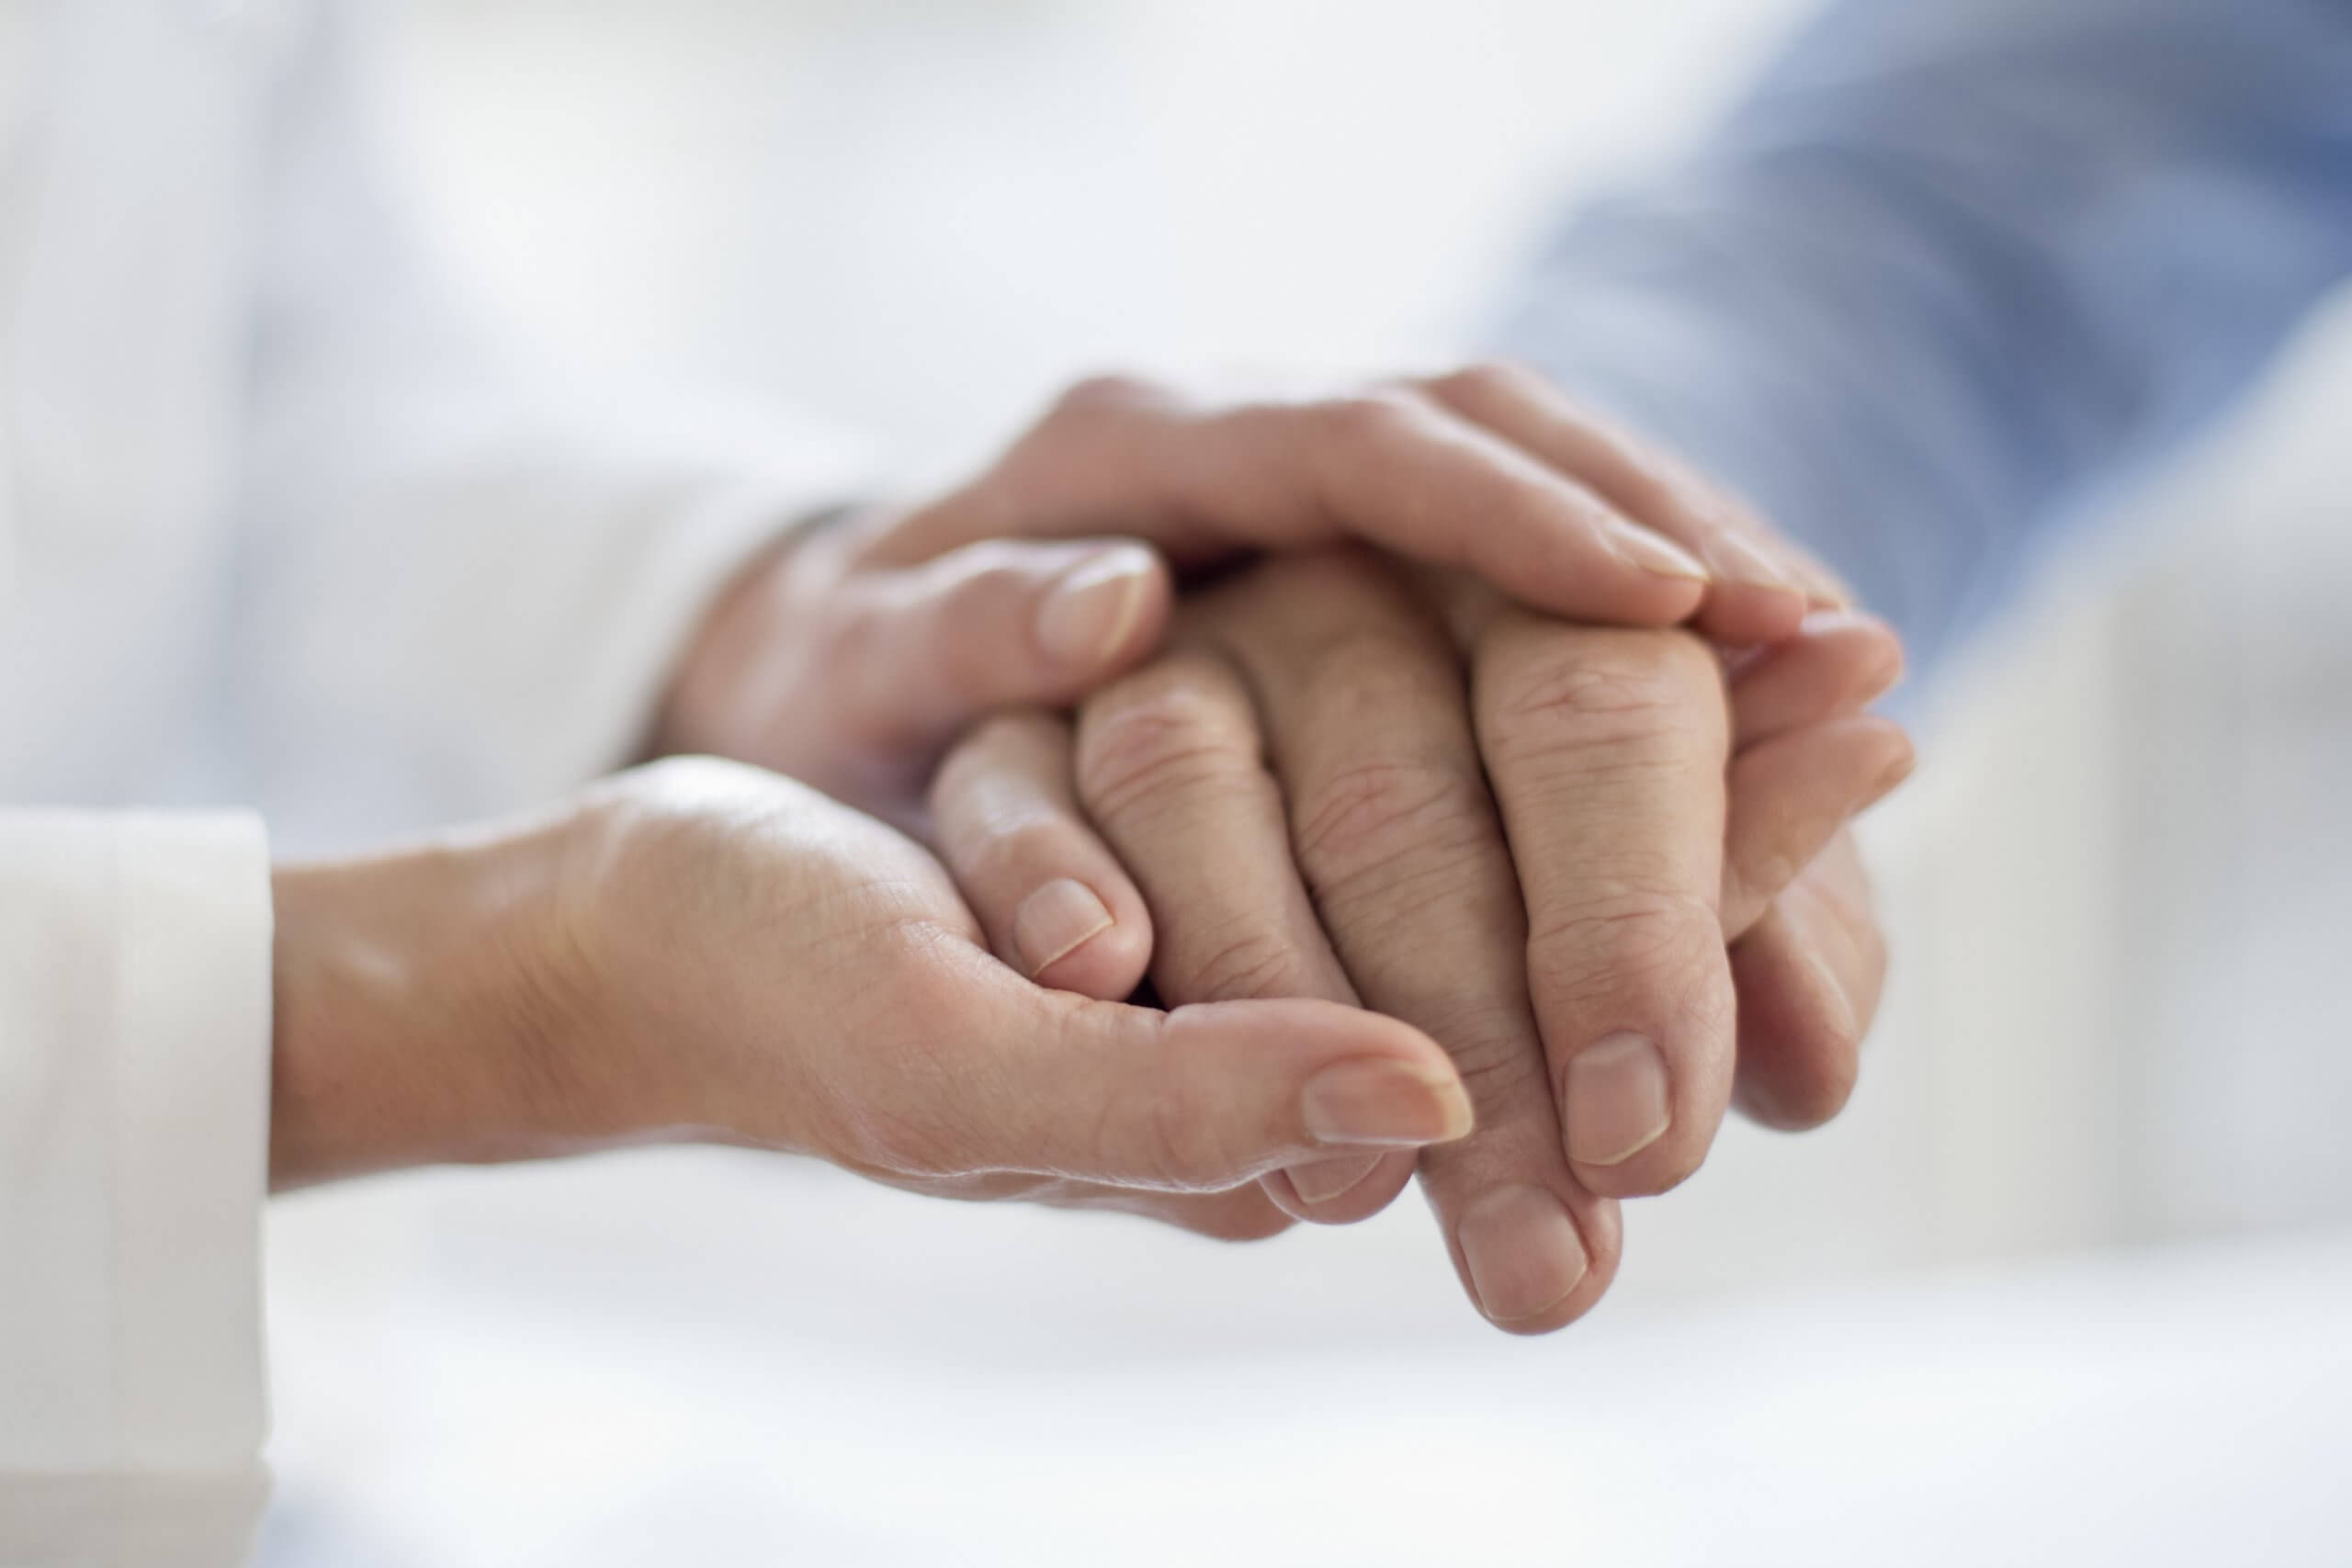 Clinician and patient hold hands. Patient decision aids are a useful tool to promote healthcare equity